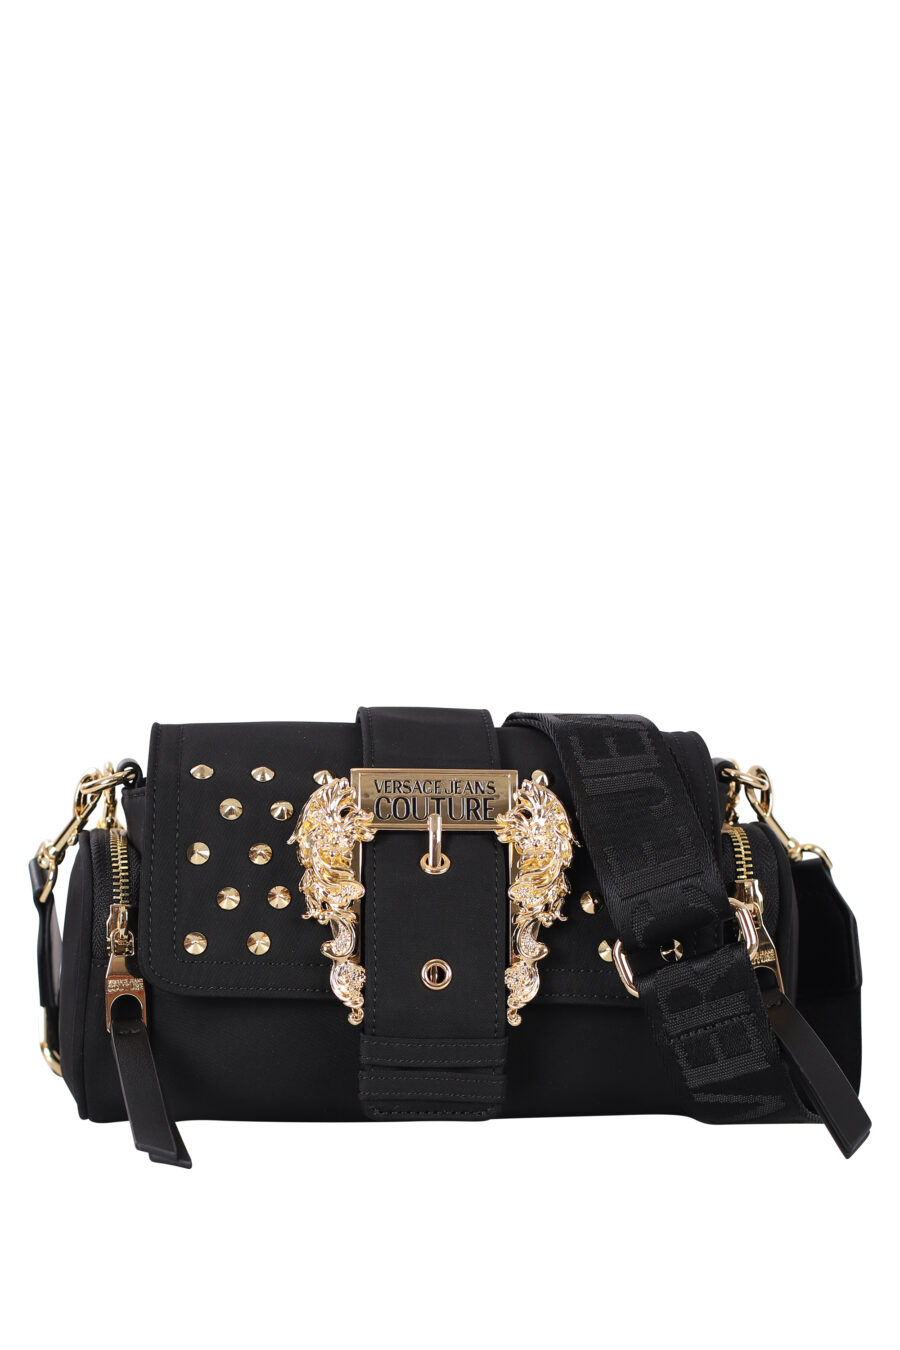 Black shoulder bag with studs and baroque buckle - IMG 0550